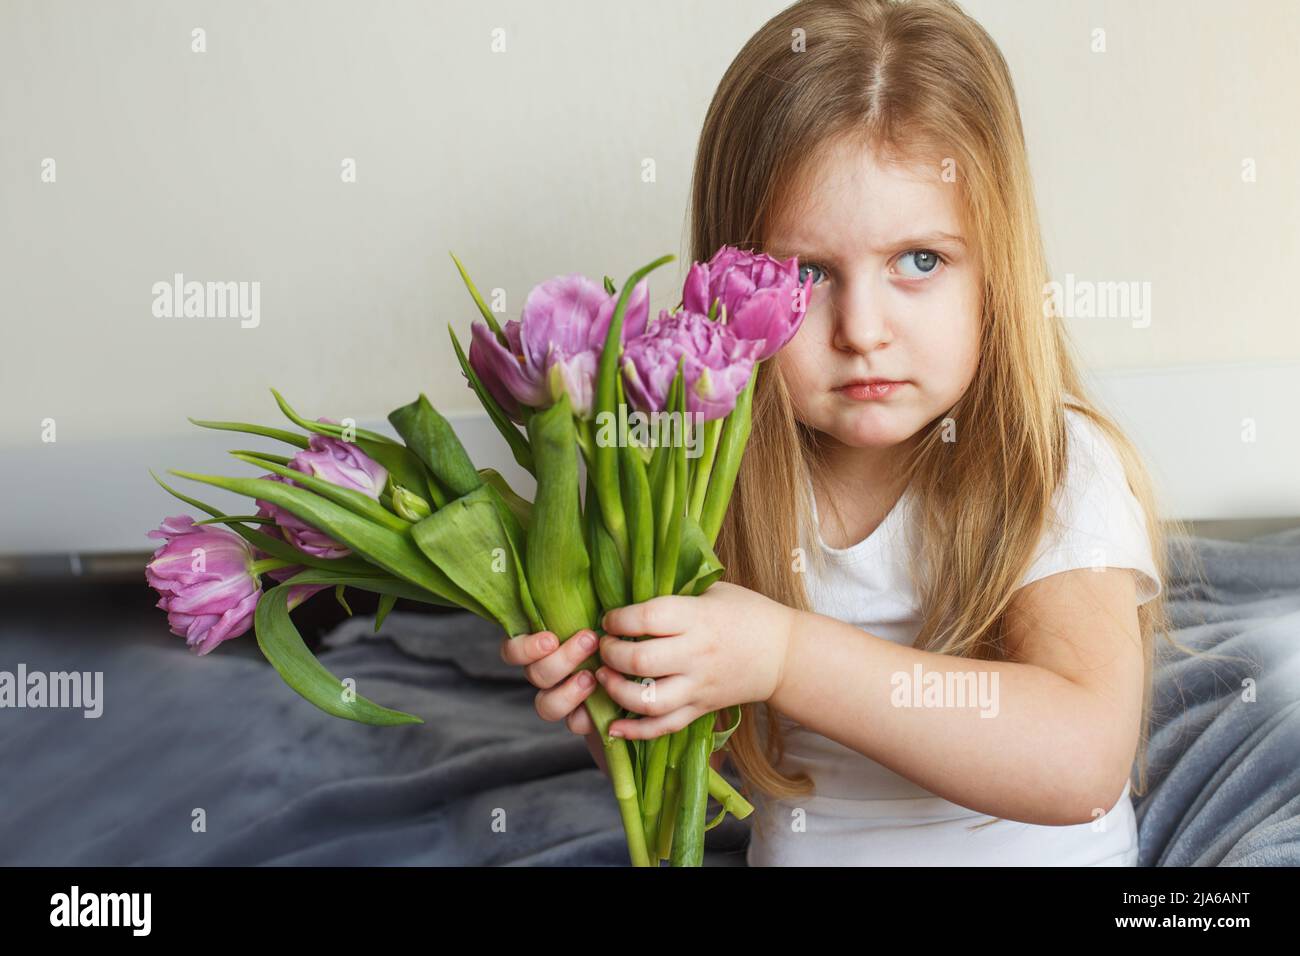 portrait of a litlle girl with bouquet of flowers tulips in her hands Stock Photo